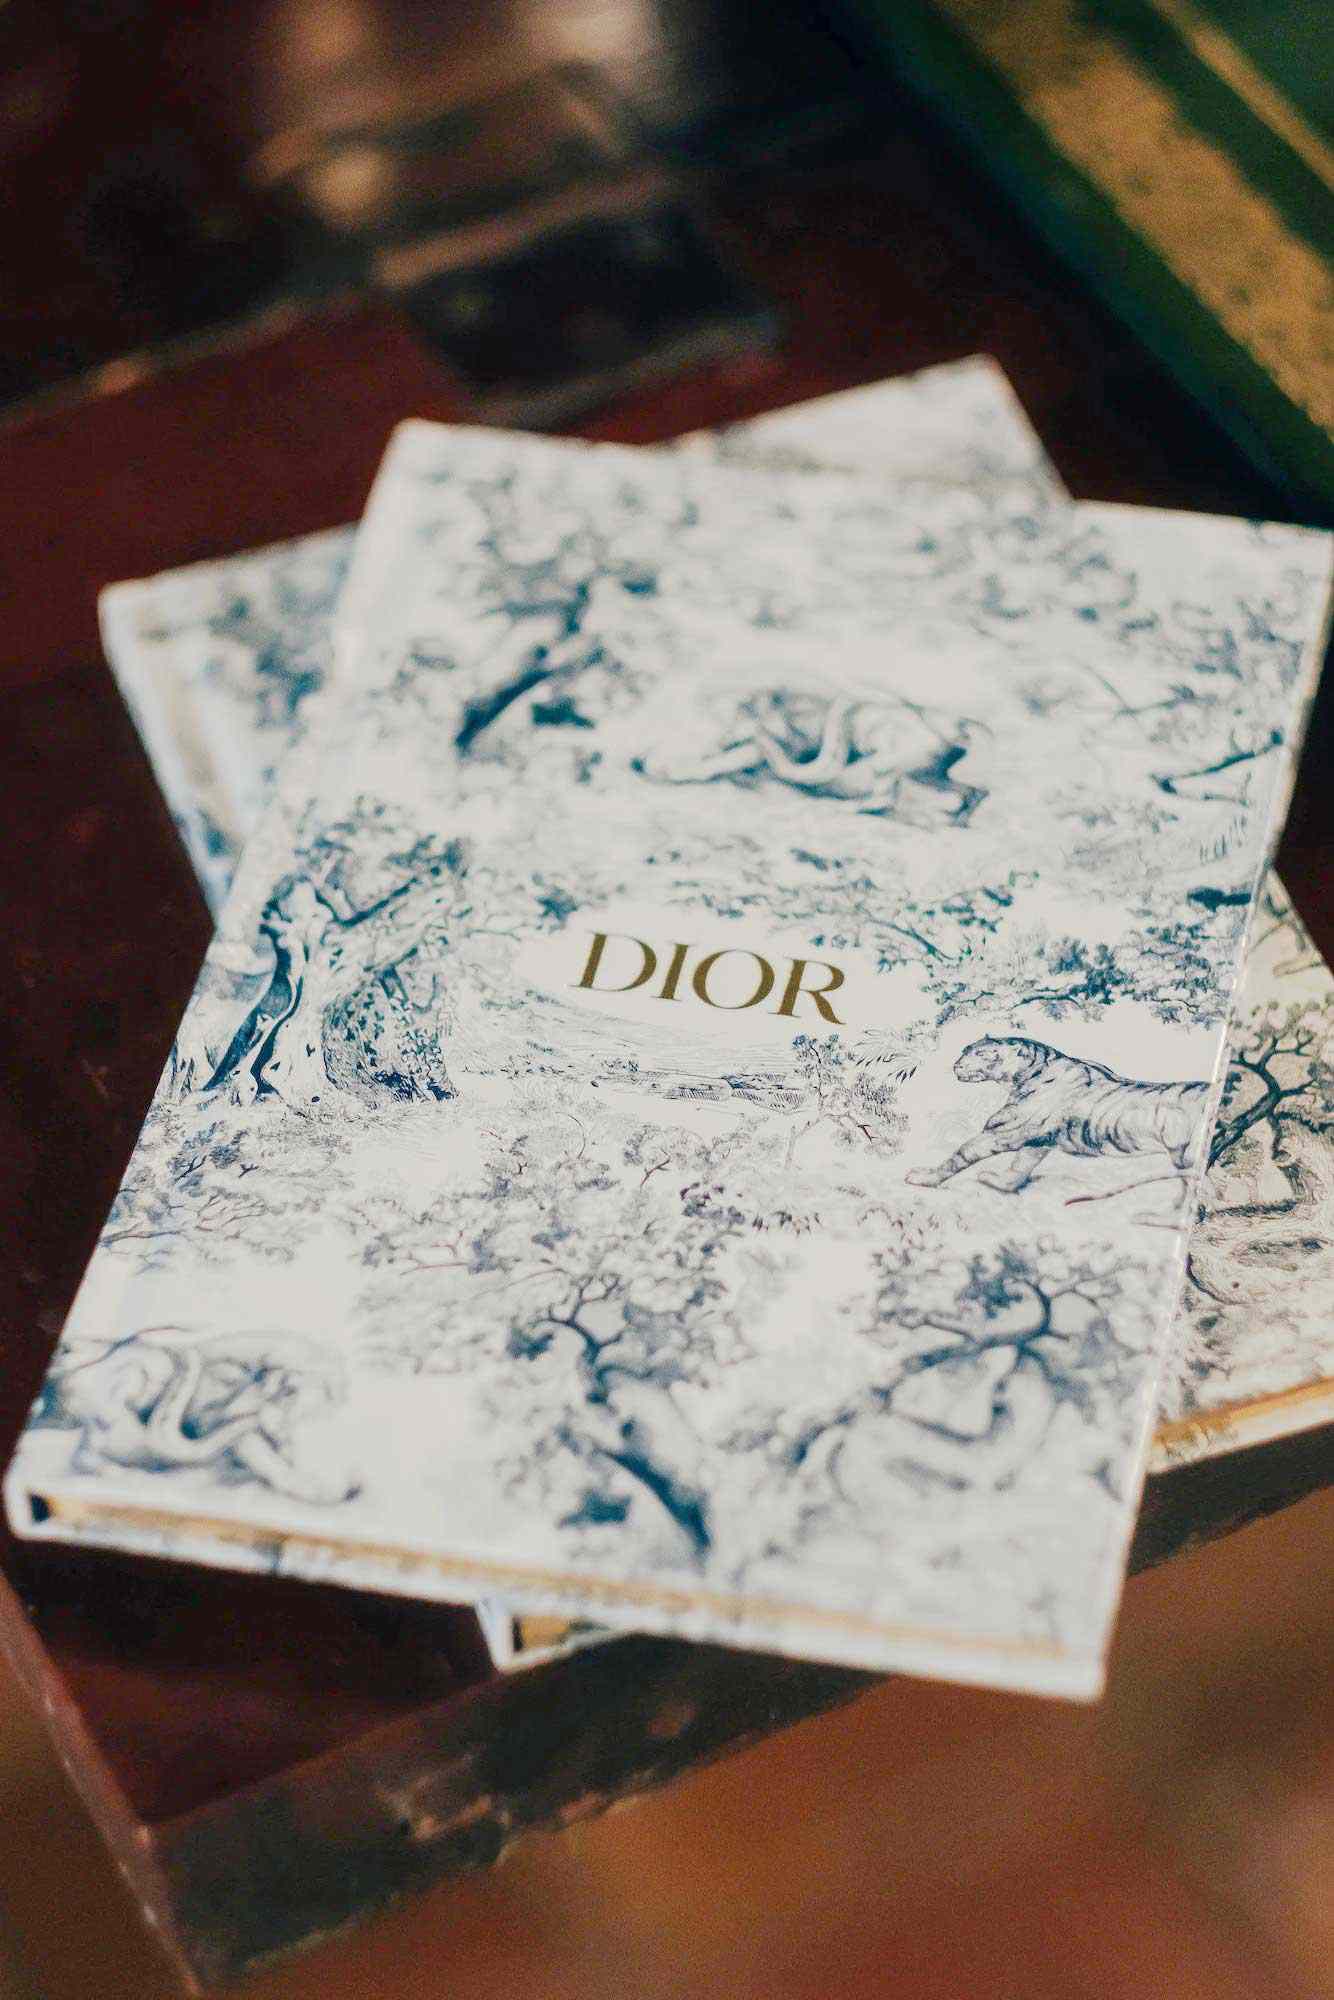 Dior Toile du Jouy Notebook